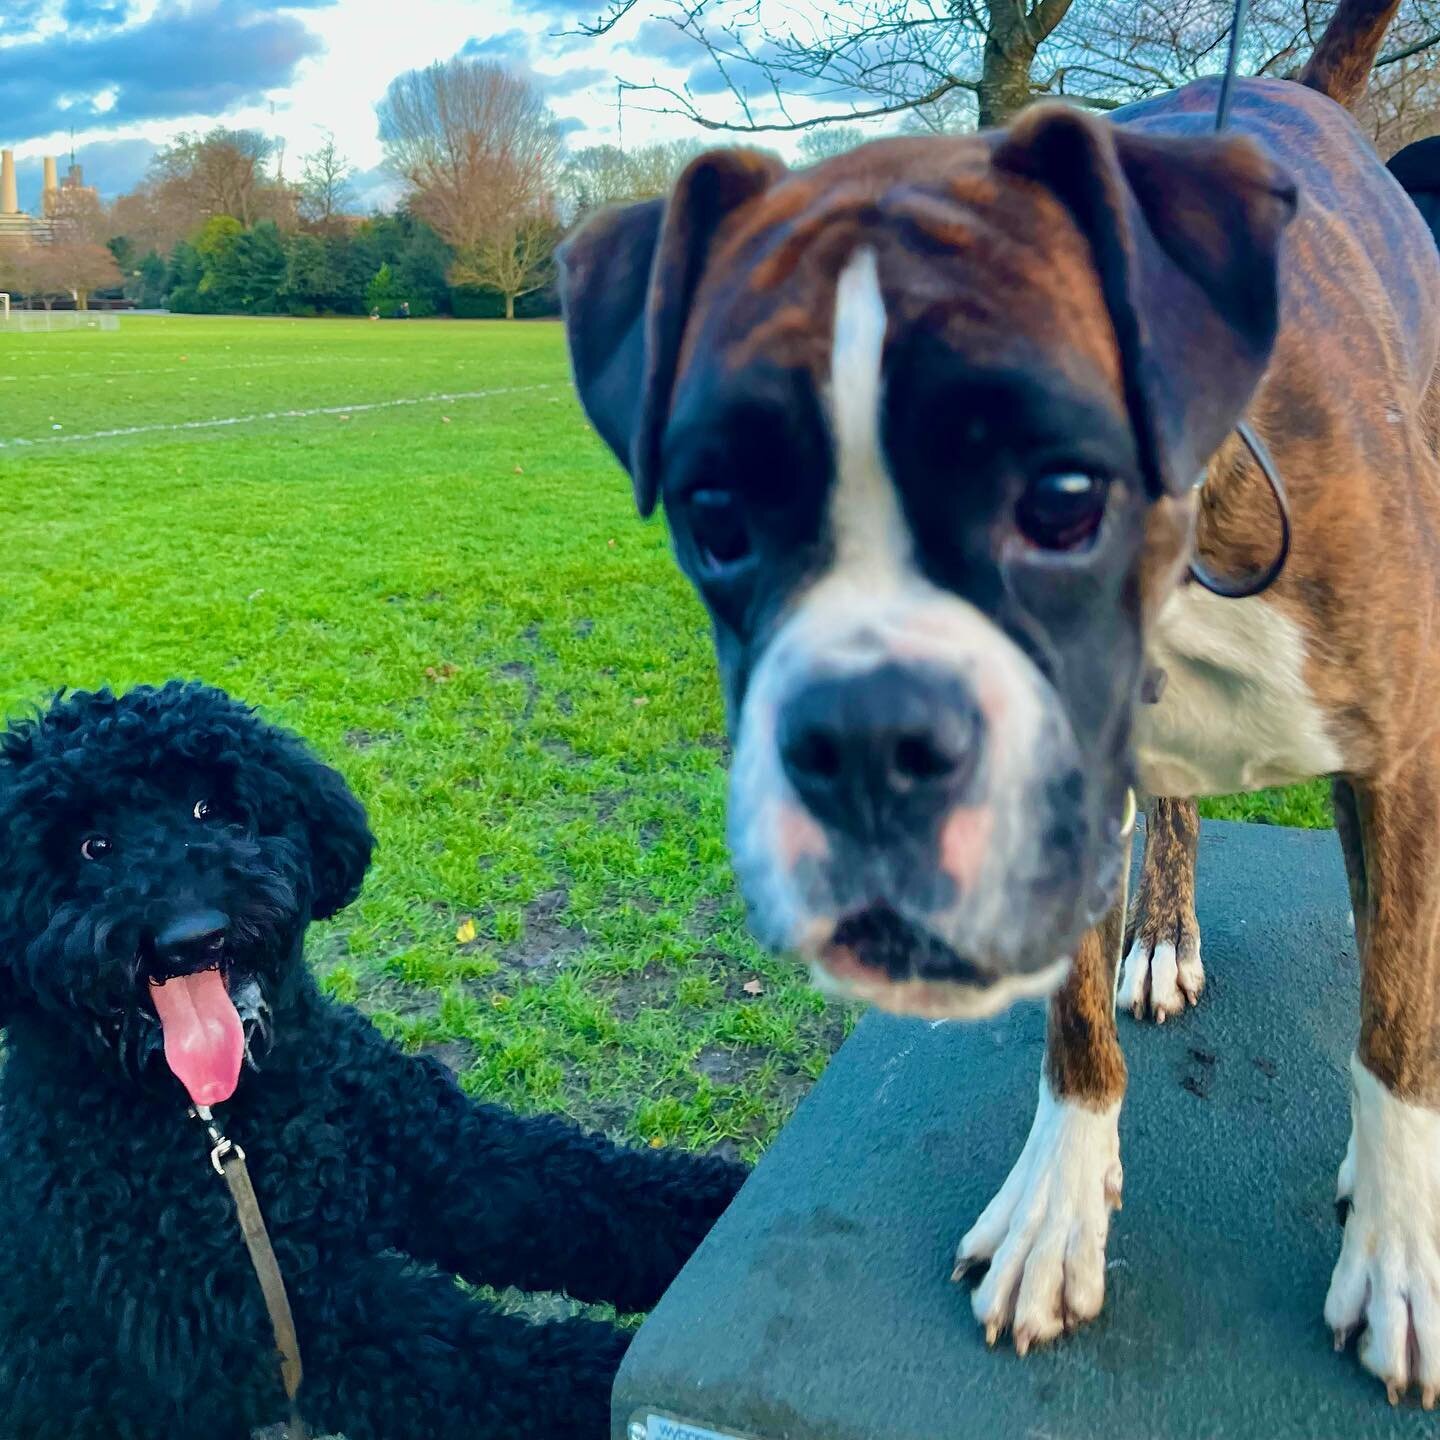 ✨FUN✨FRIDAY✨

Phoenix the Poodle and Koko the Boxer having a blast in the park together 🤩